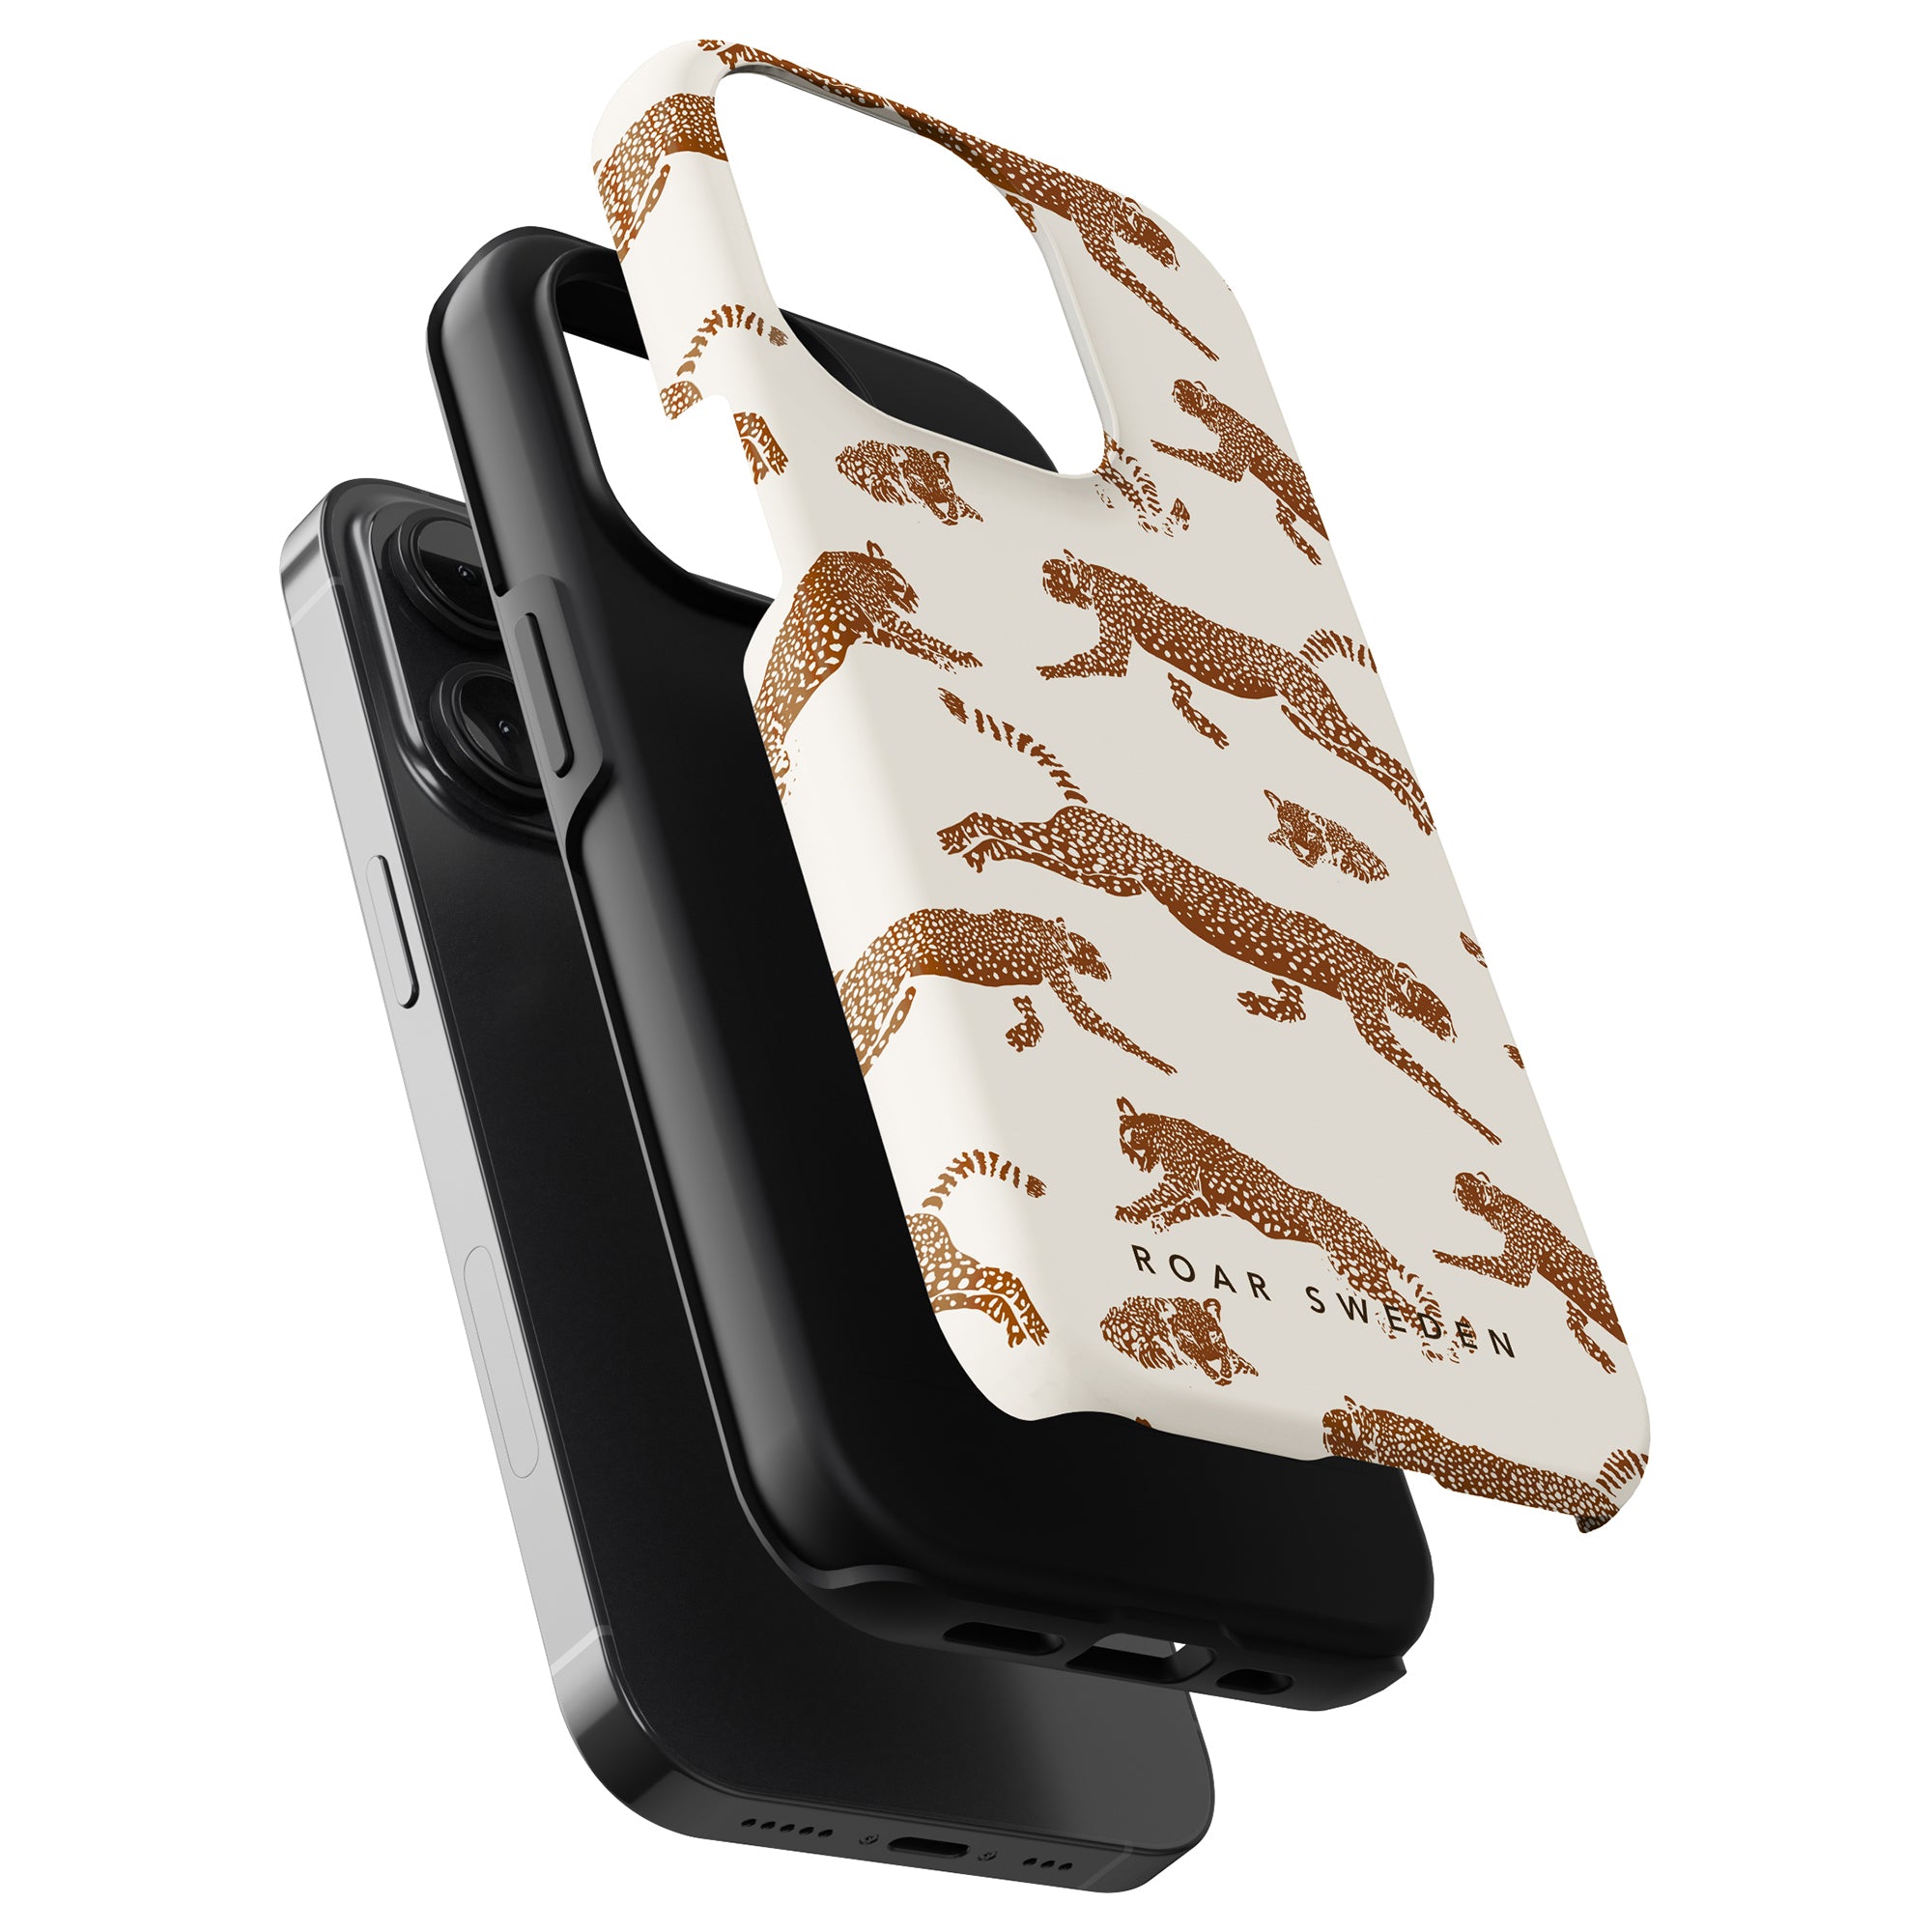 Ritzy - Tough Case with black case and a patterned card holder attachment from the Leopard Collection featuring a cheetah design.